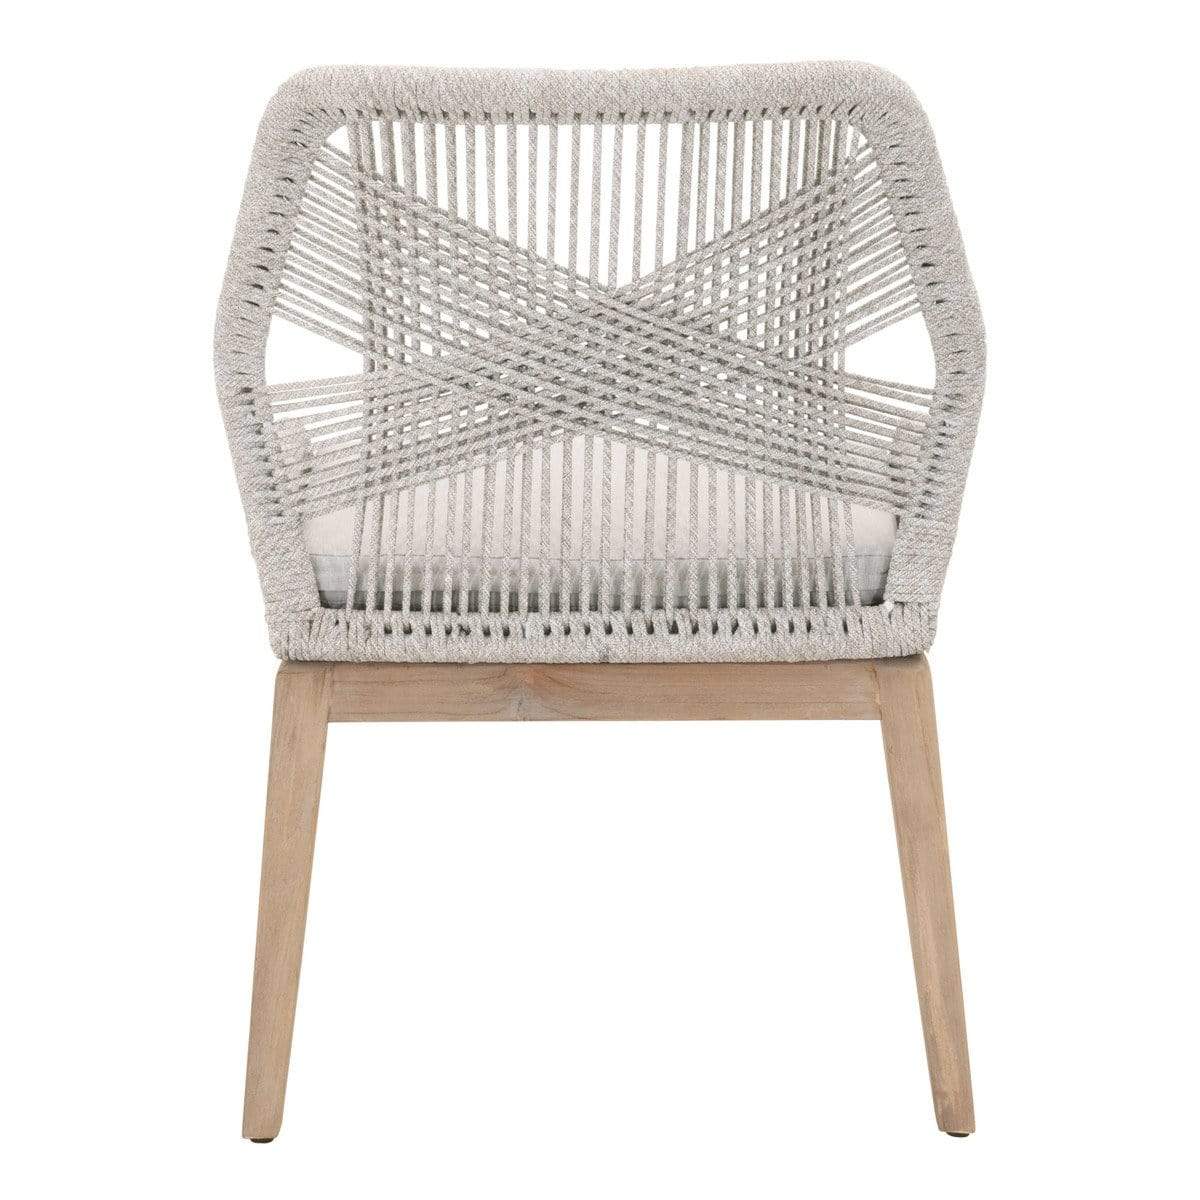 BLU Home Loom Outdoor Dining Chair - Taupe & White (Set of 2) Furniture orient-express-6808KD.WTA/PUM/GT